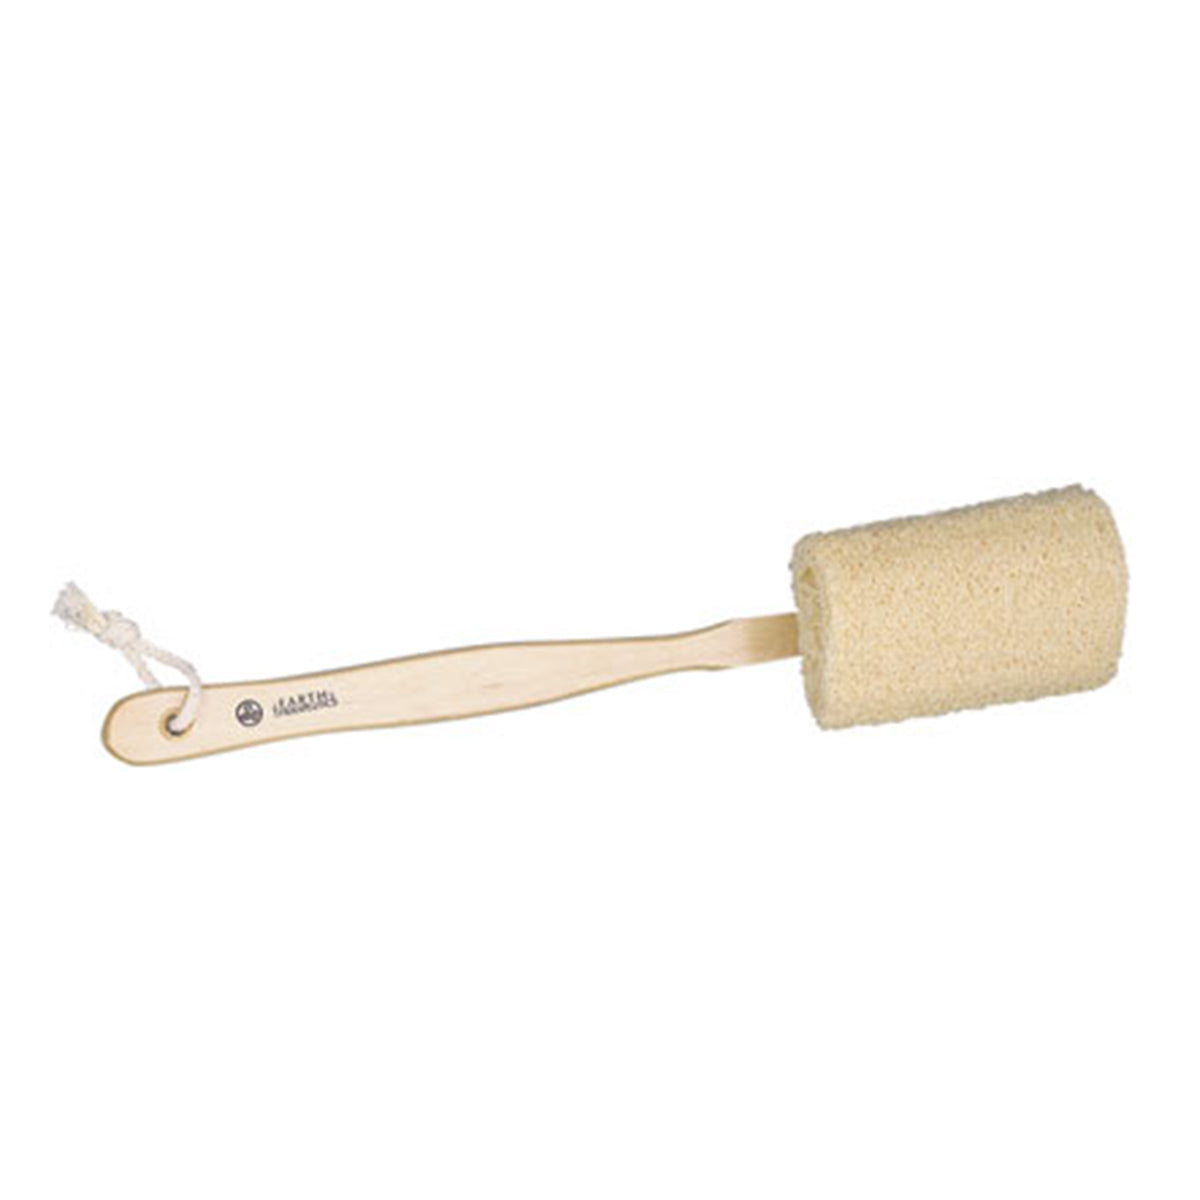 Primary image of Loofah Back Brush with Detachable Handle